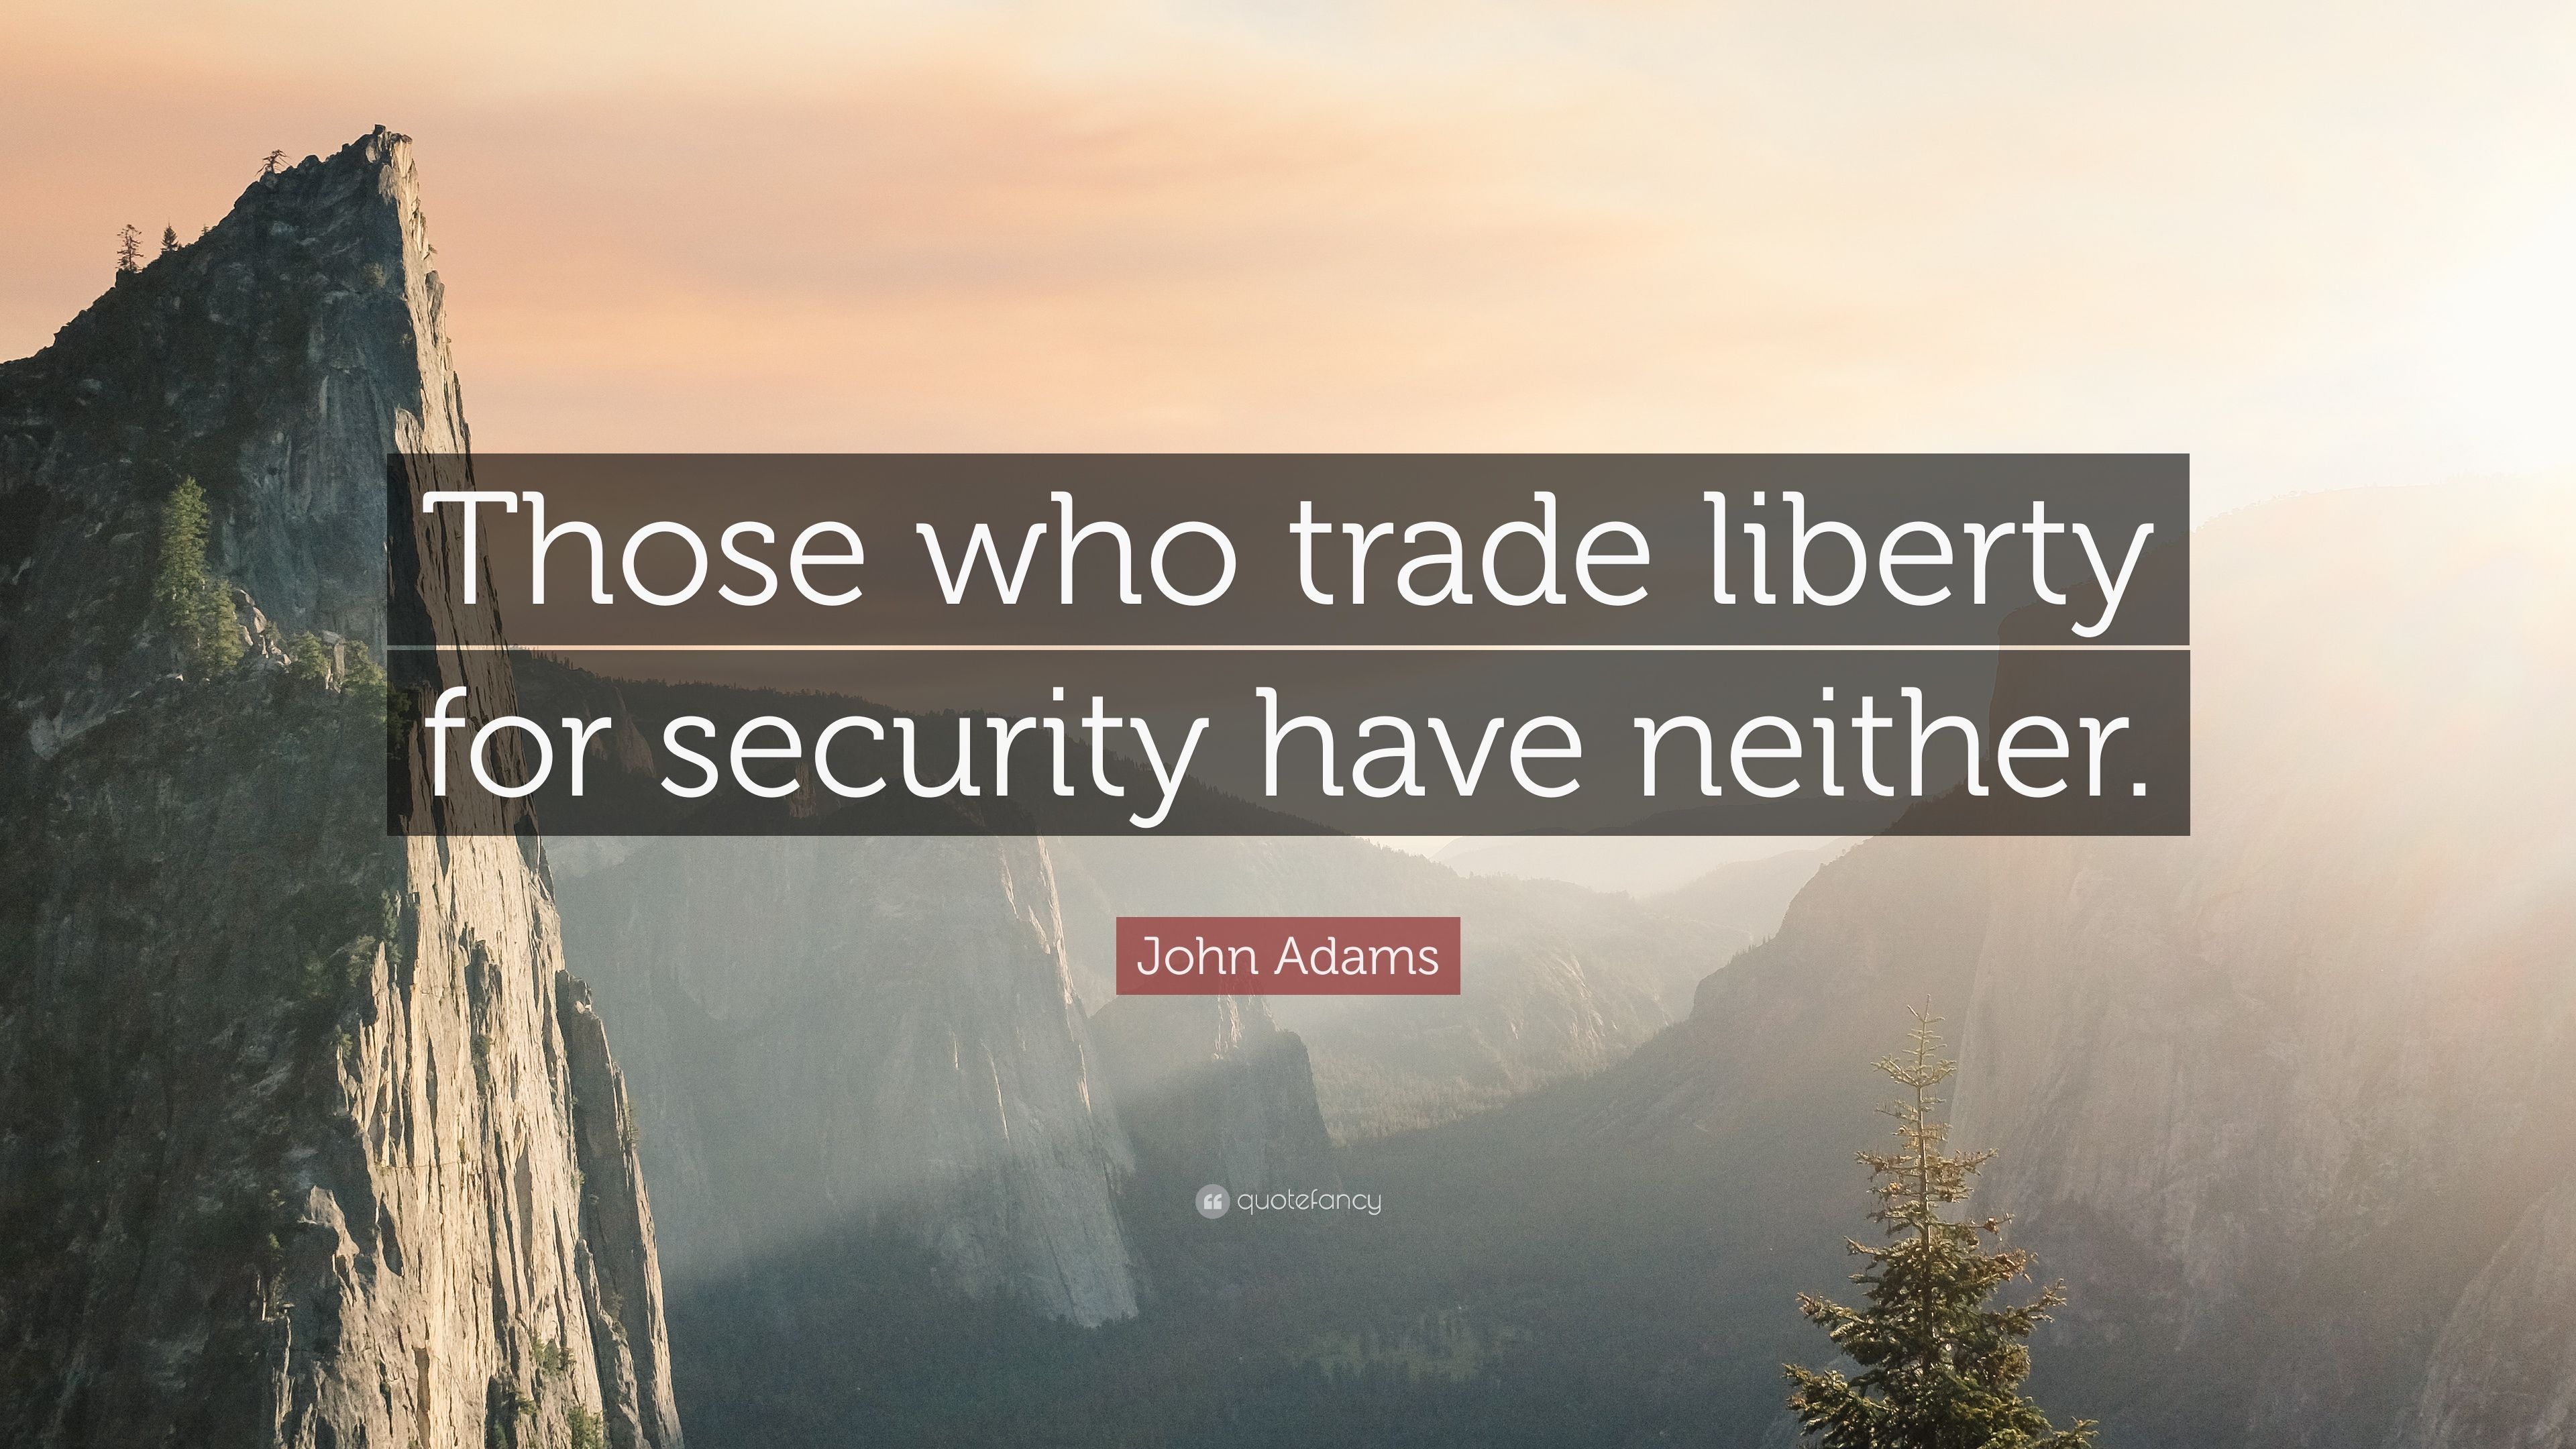 John Adams Quote: “Those who trade .quotefancy.com